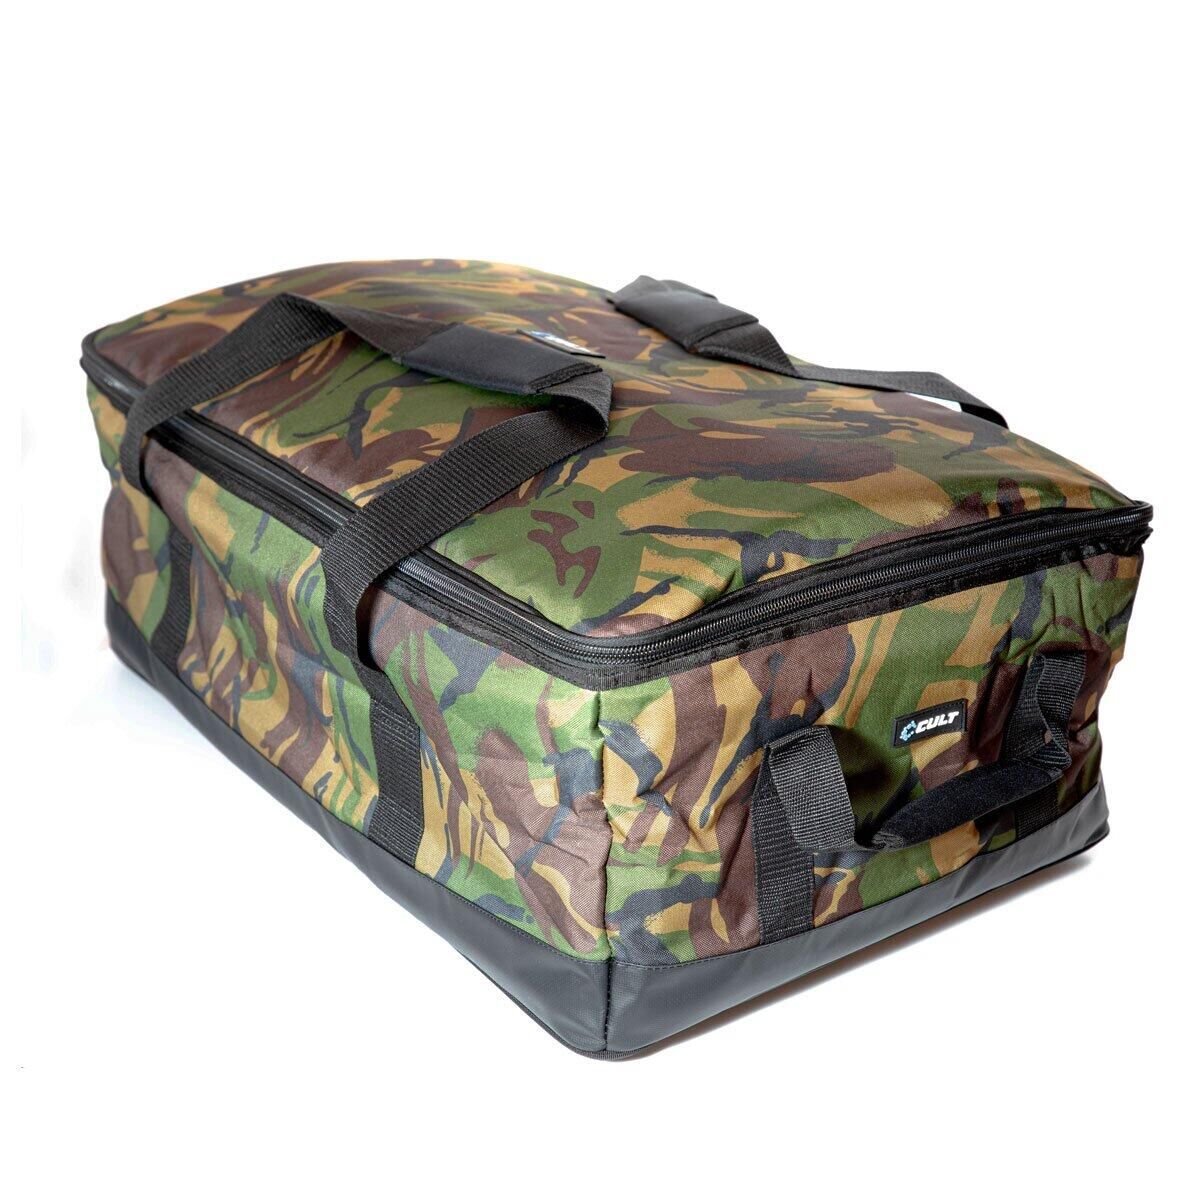 CULT TACKLE DPM Camo Deluxe XL Bait Boat Bag